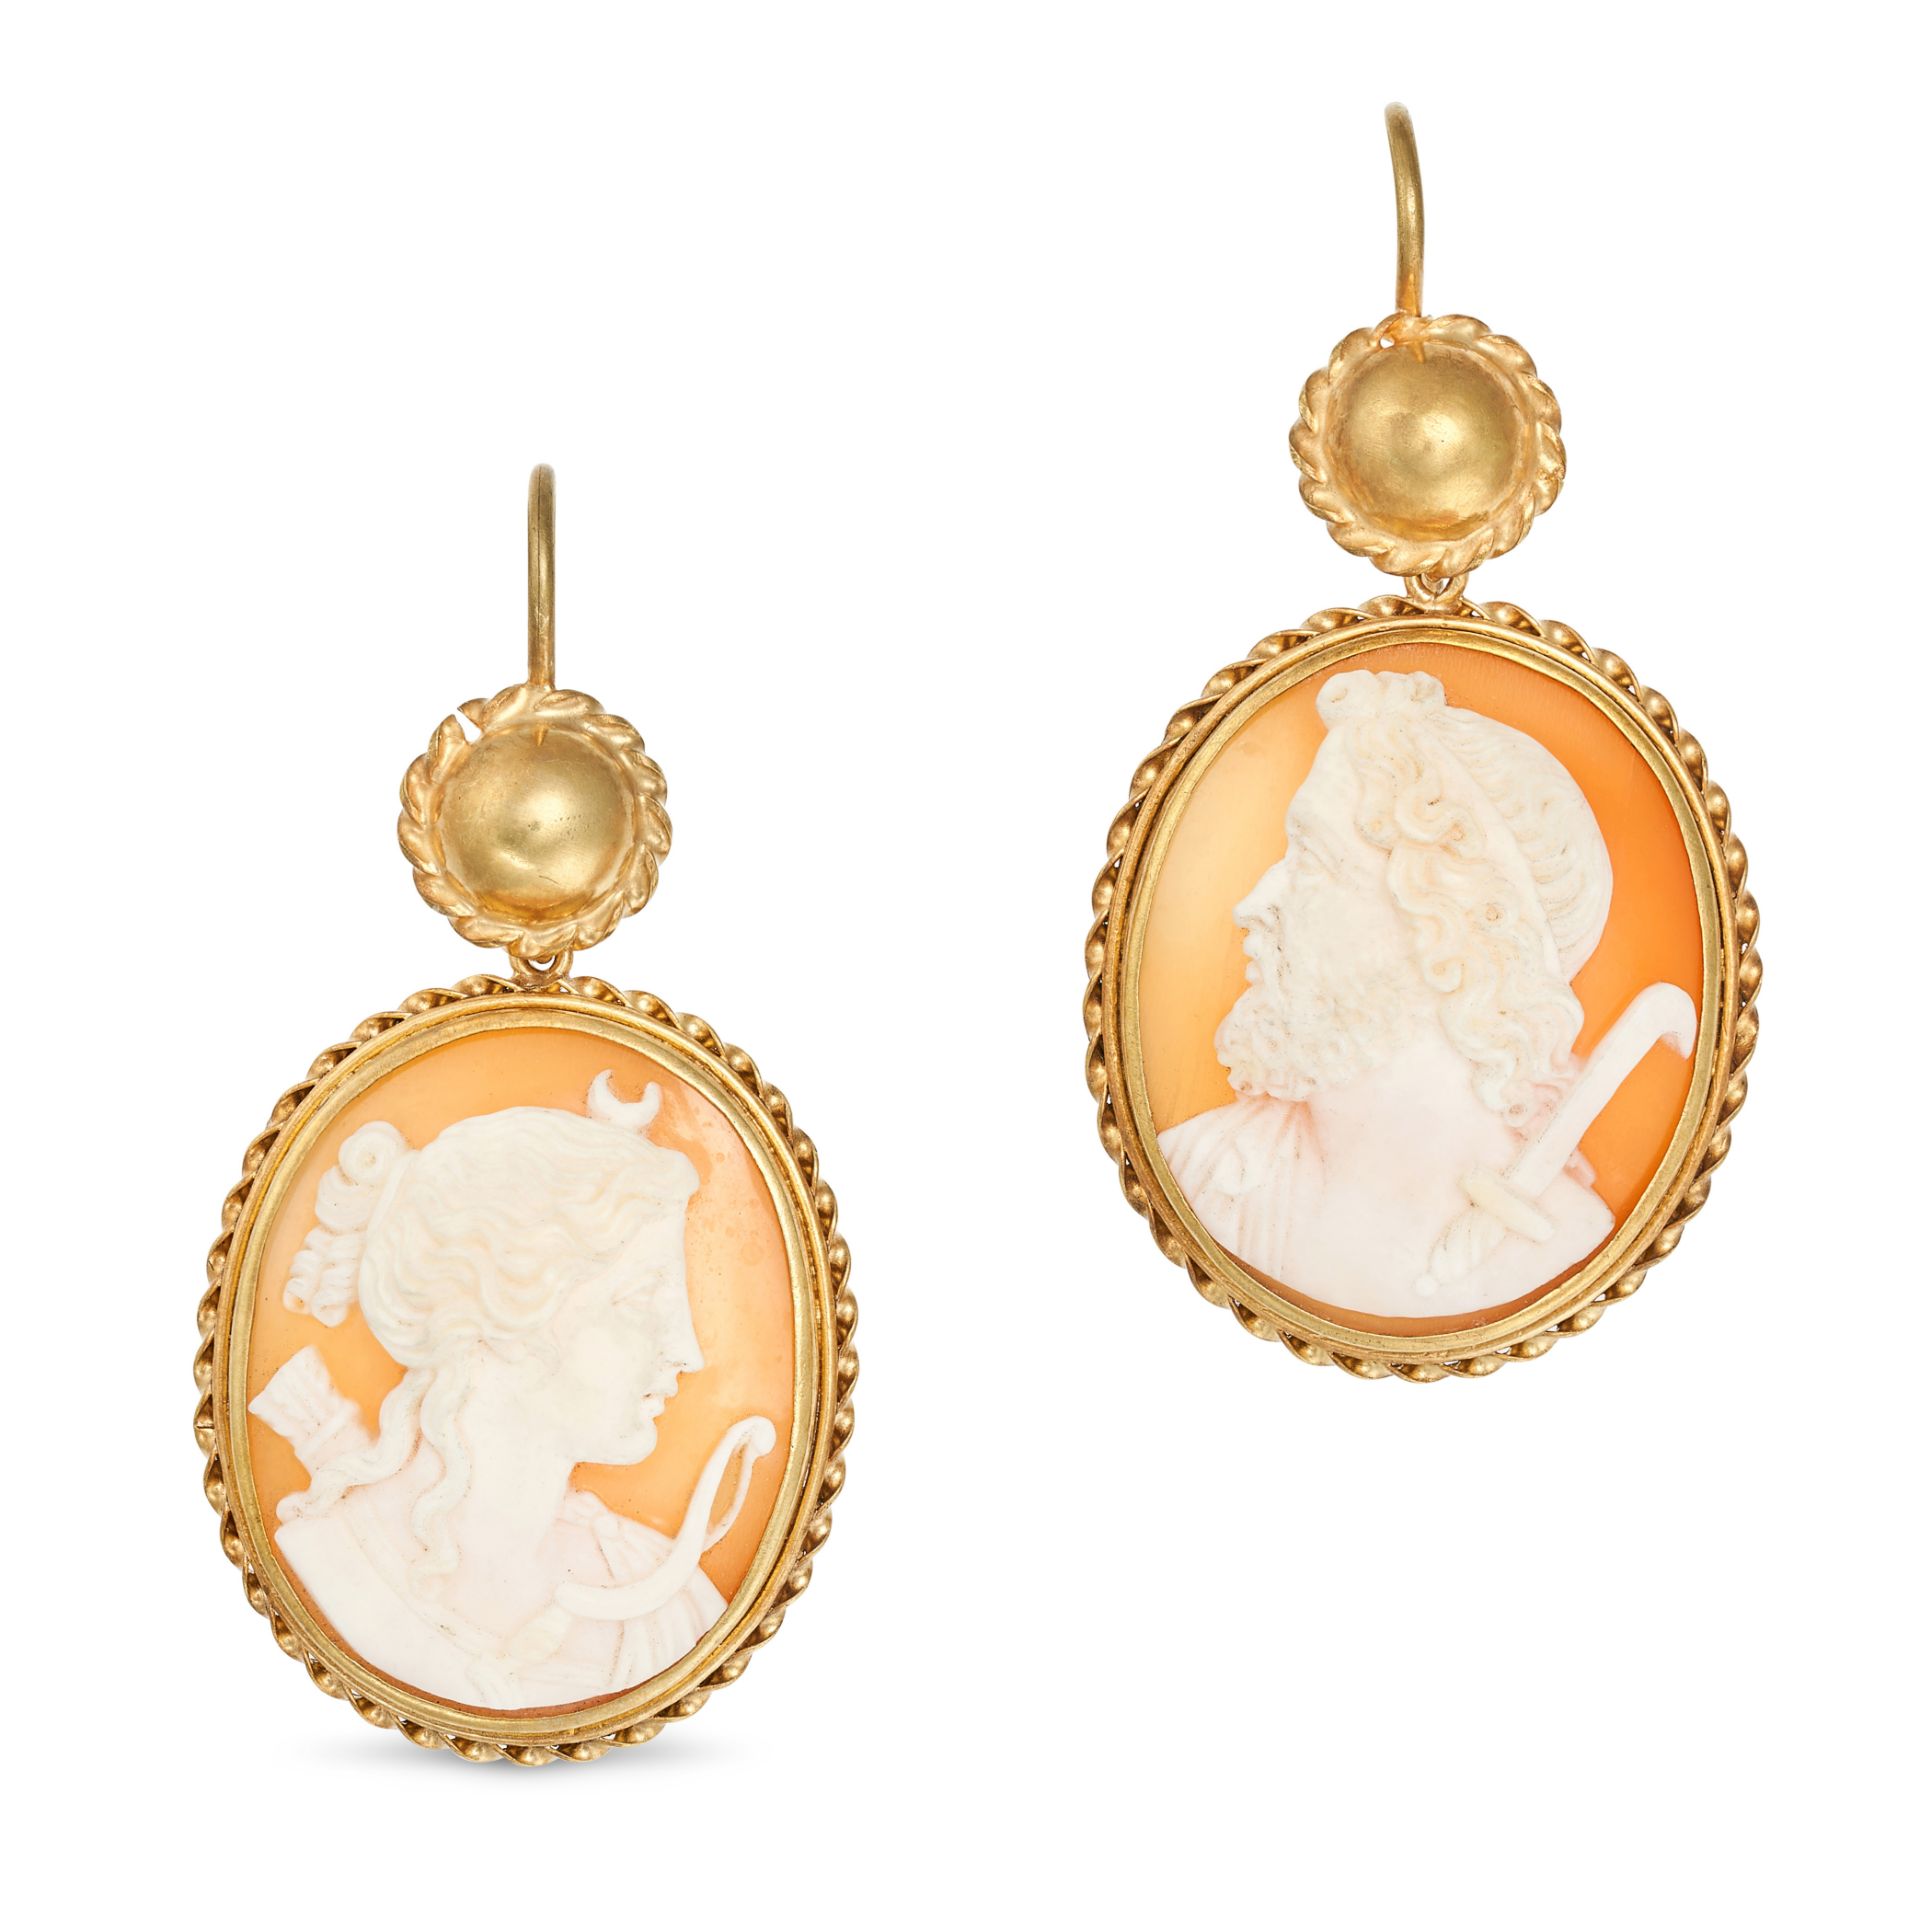 A PAIR OF ANTIQUE SHELL CAMEO EARRINGS in yellow gold, one earring with a cameo depicting Artemis...